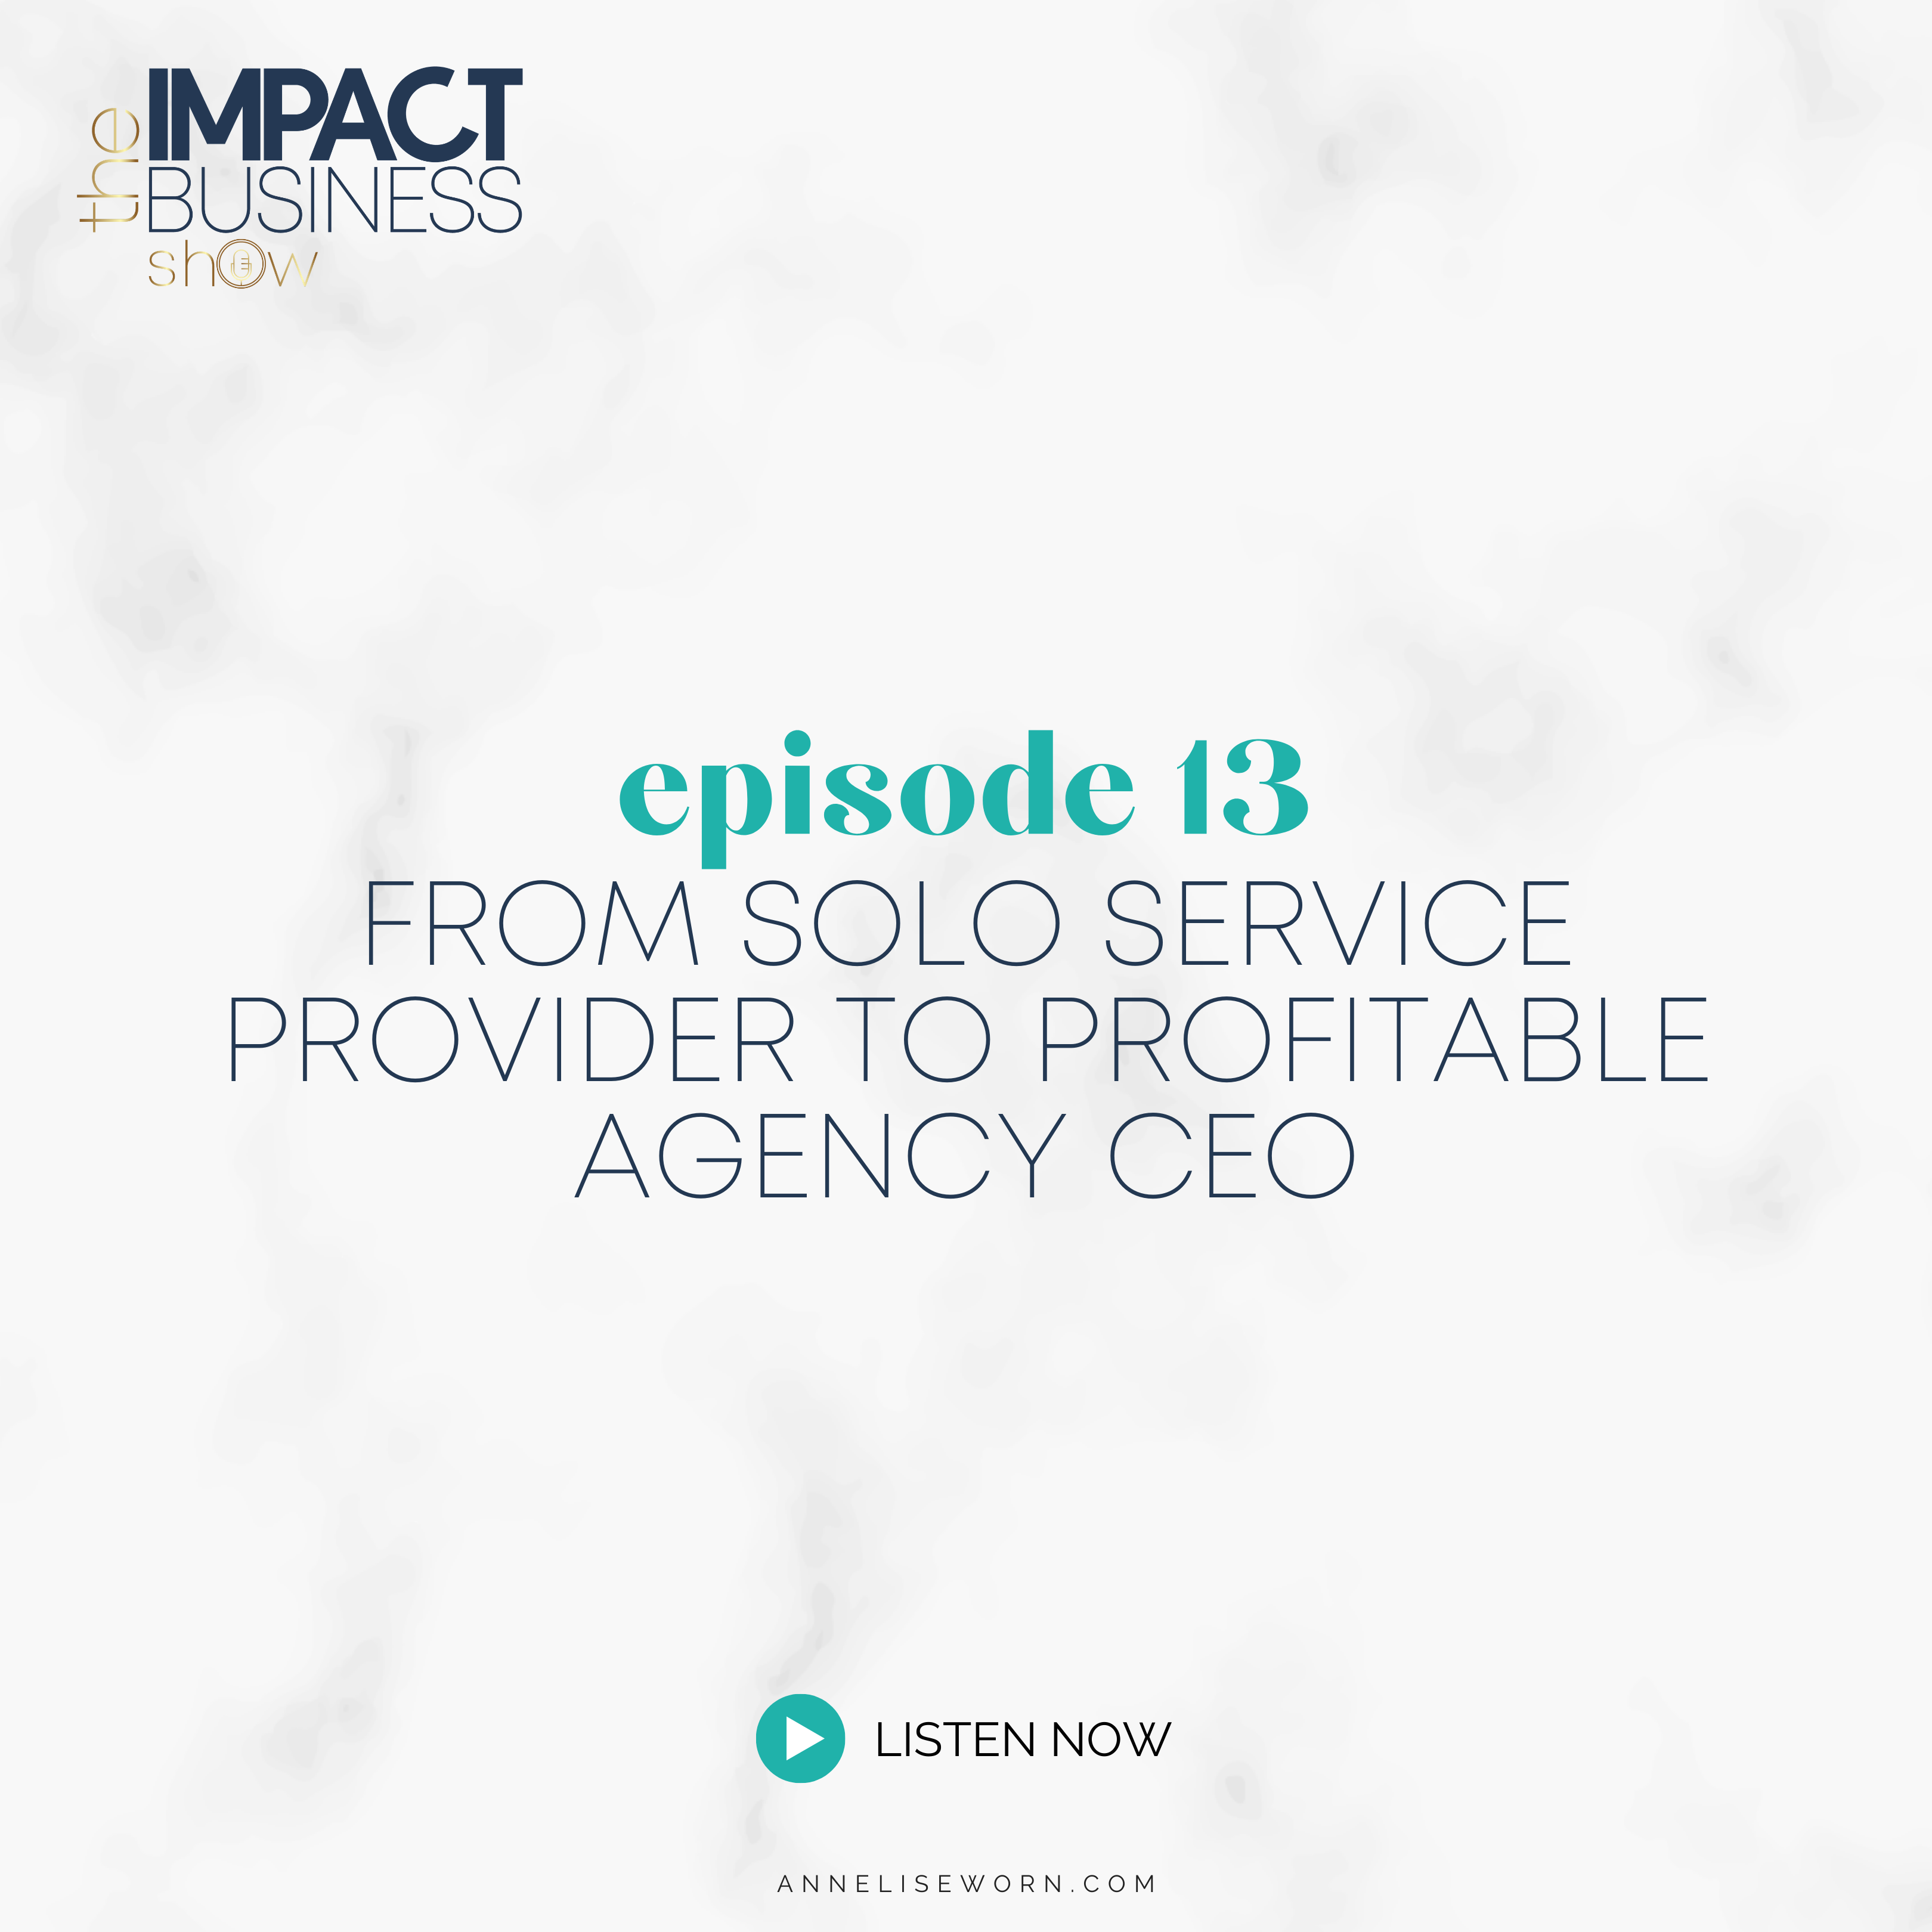 Featured image for “E13: From Solo Service Provider to Profitable Agency CEO: Impact Business Show”